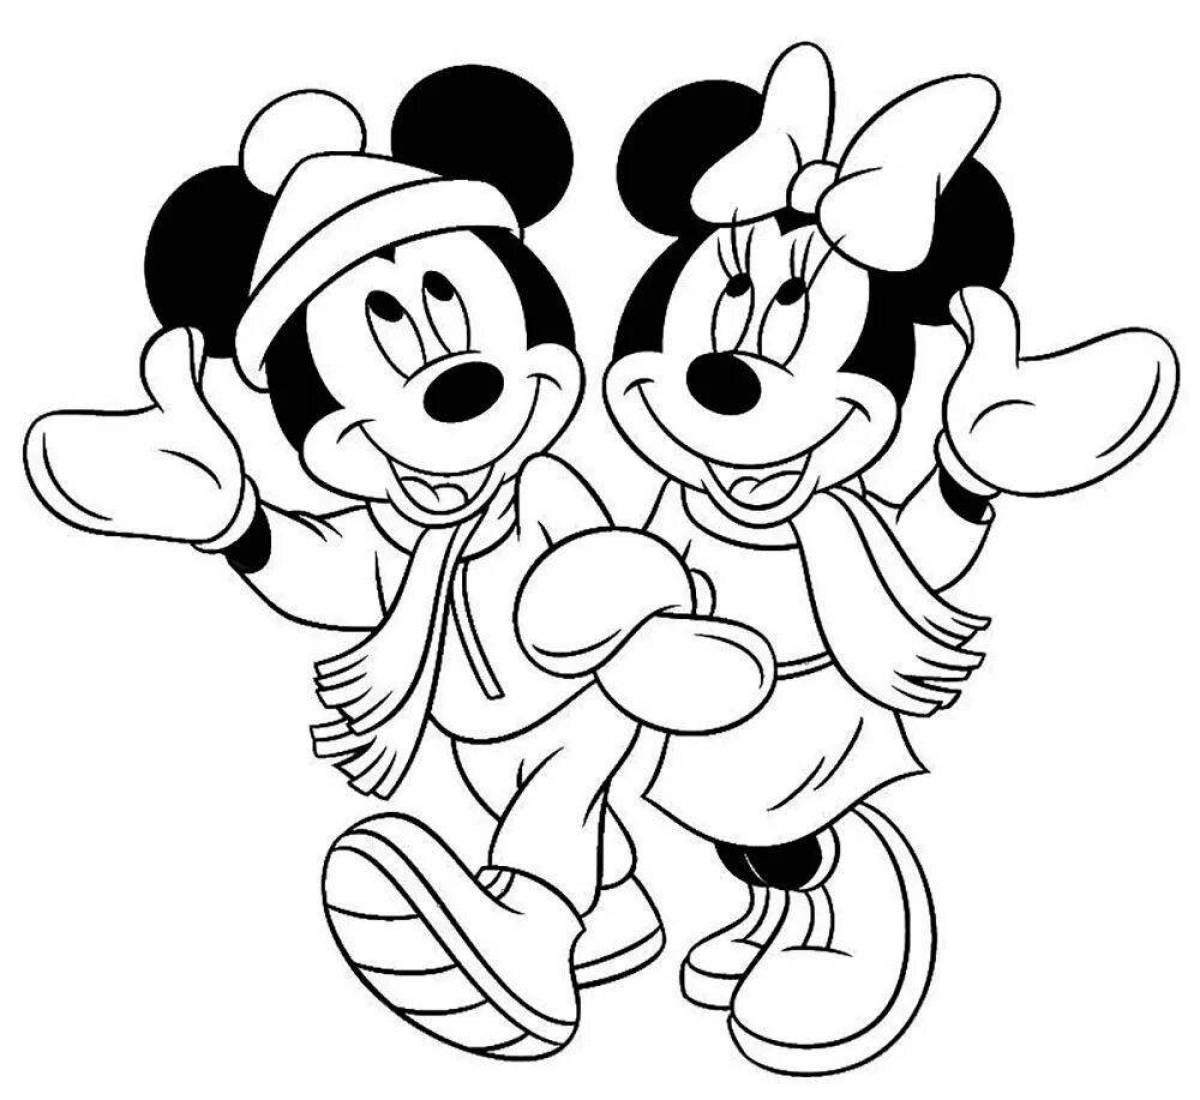 Coloring page graceful minnie mouse